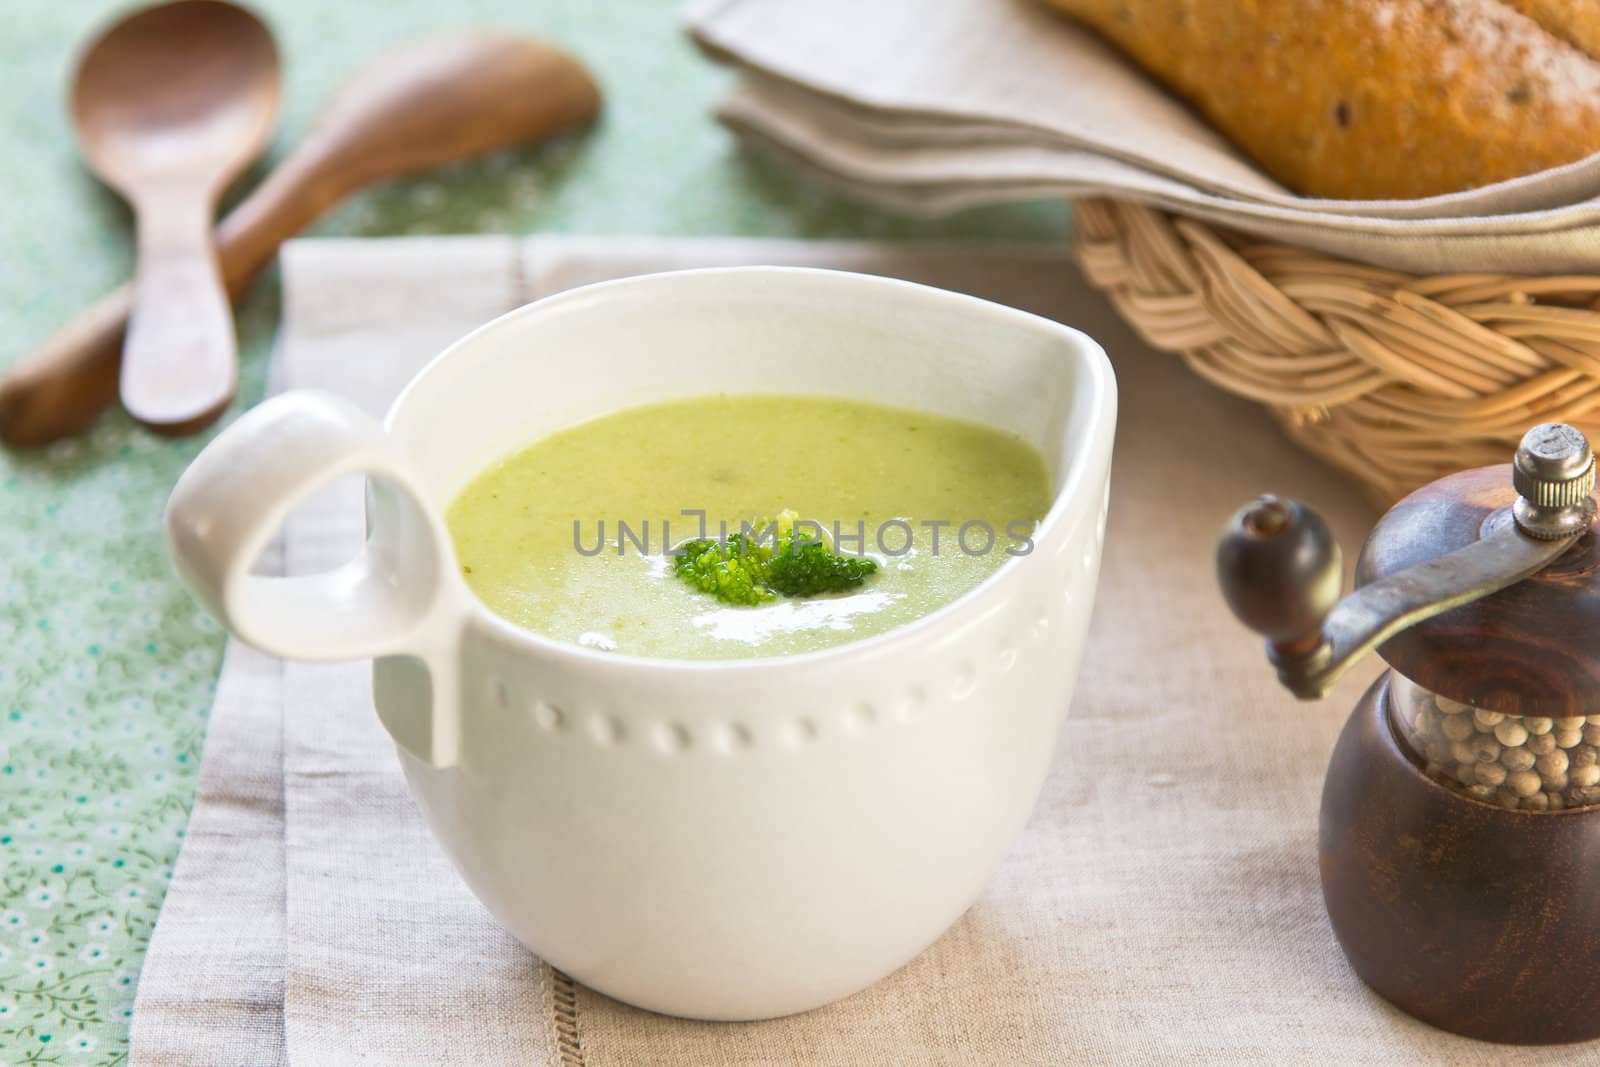 Broccoli soup by vanillaechoes